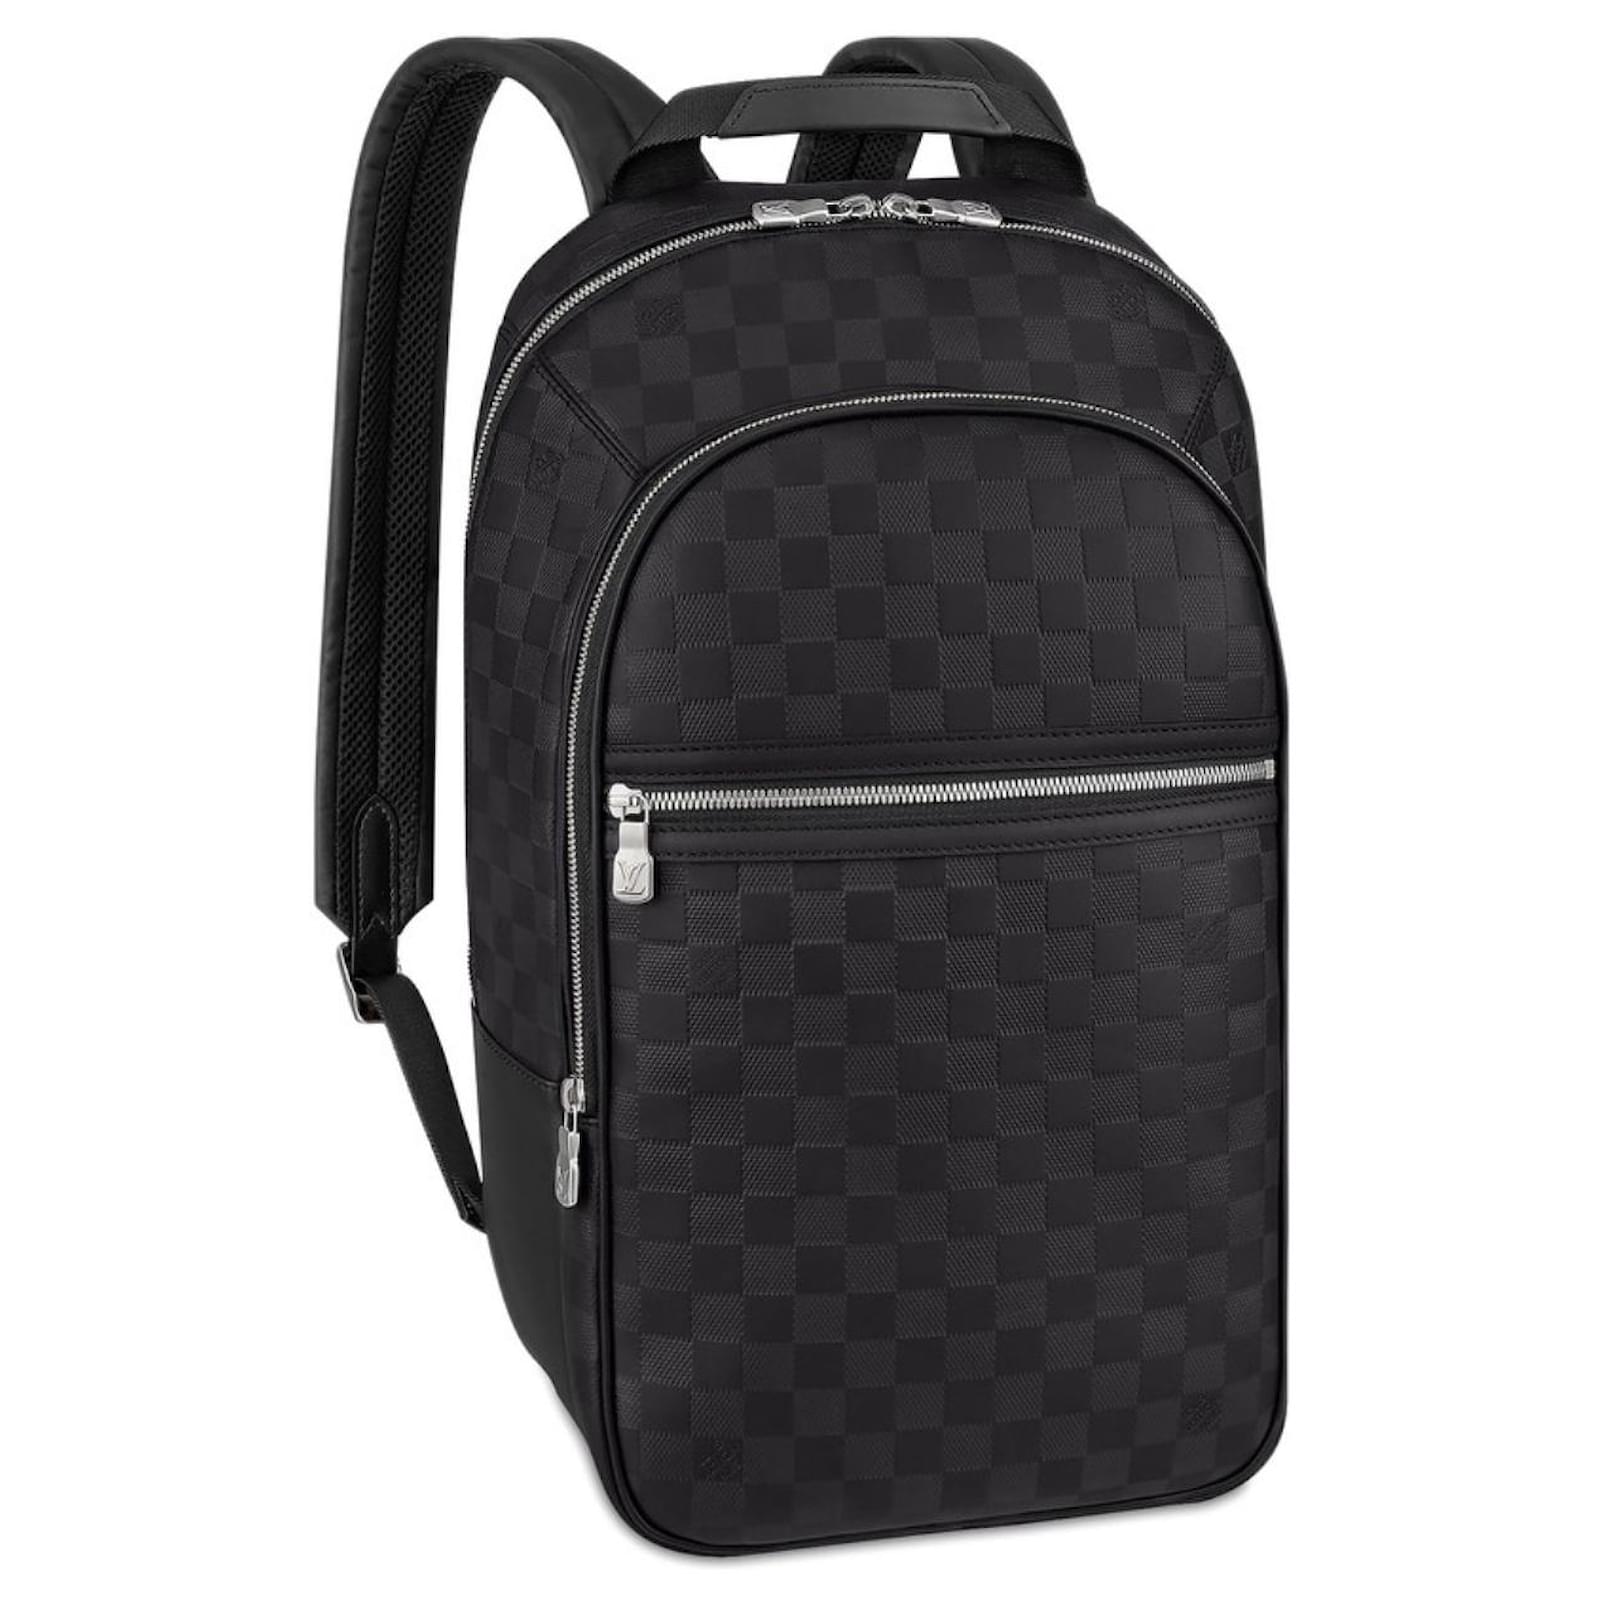 lv leather backpack